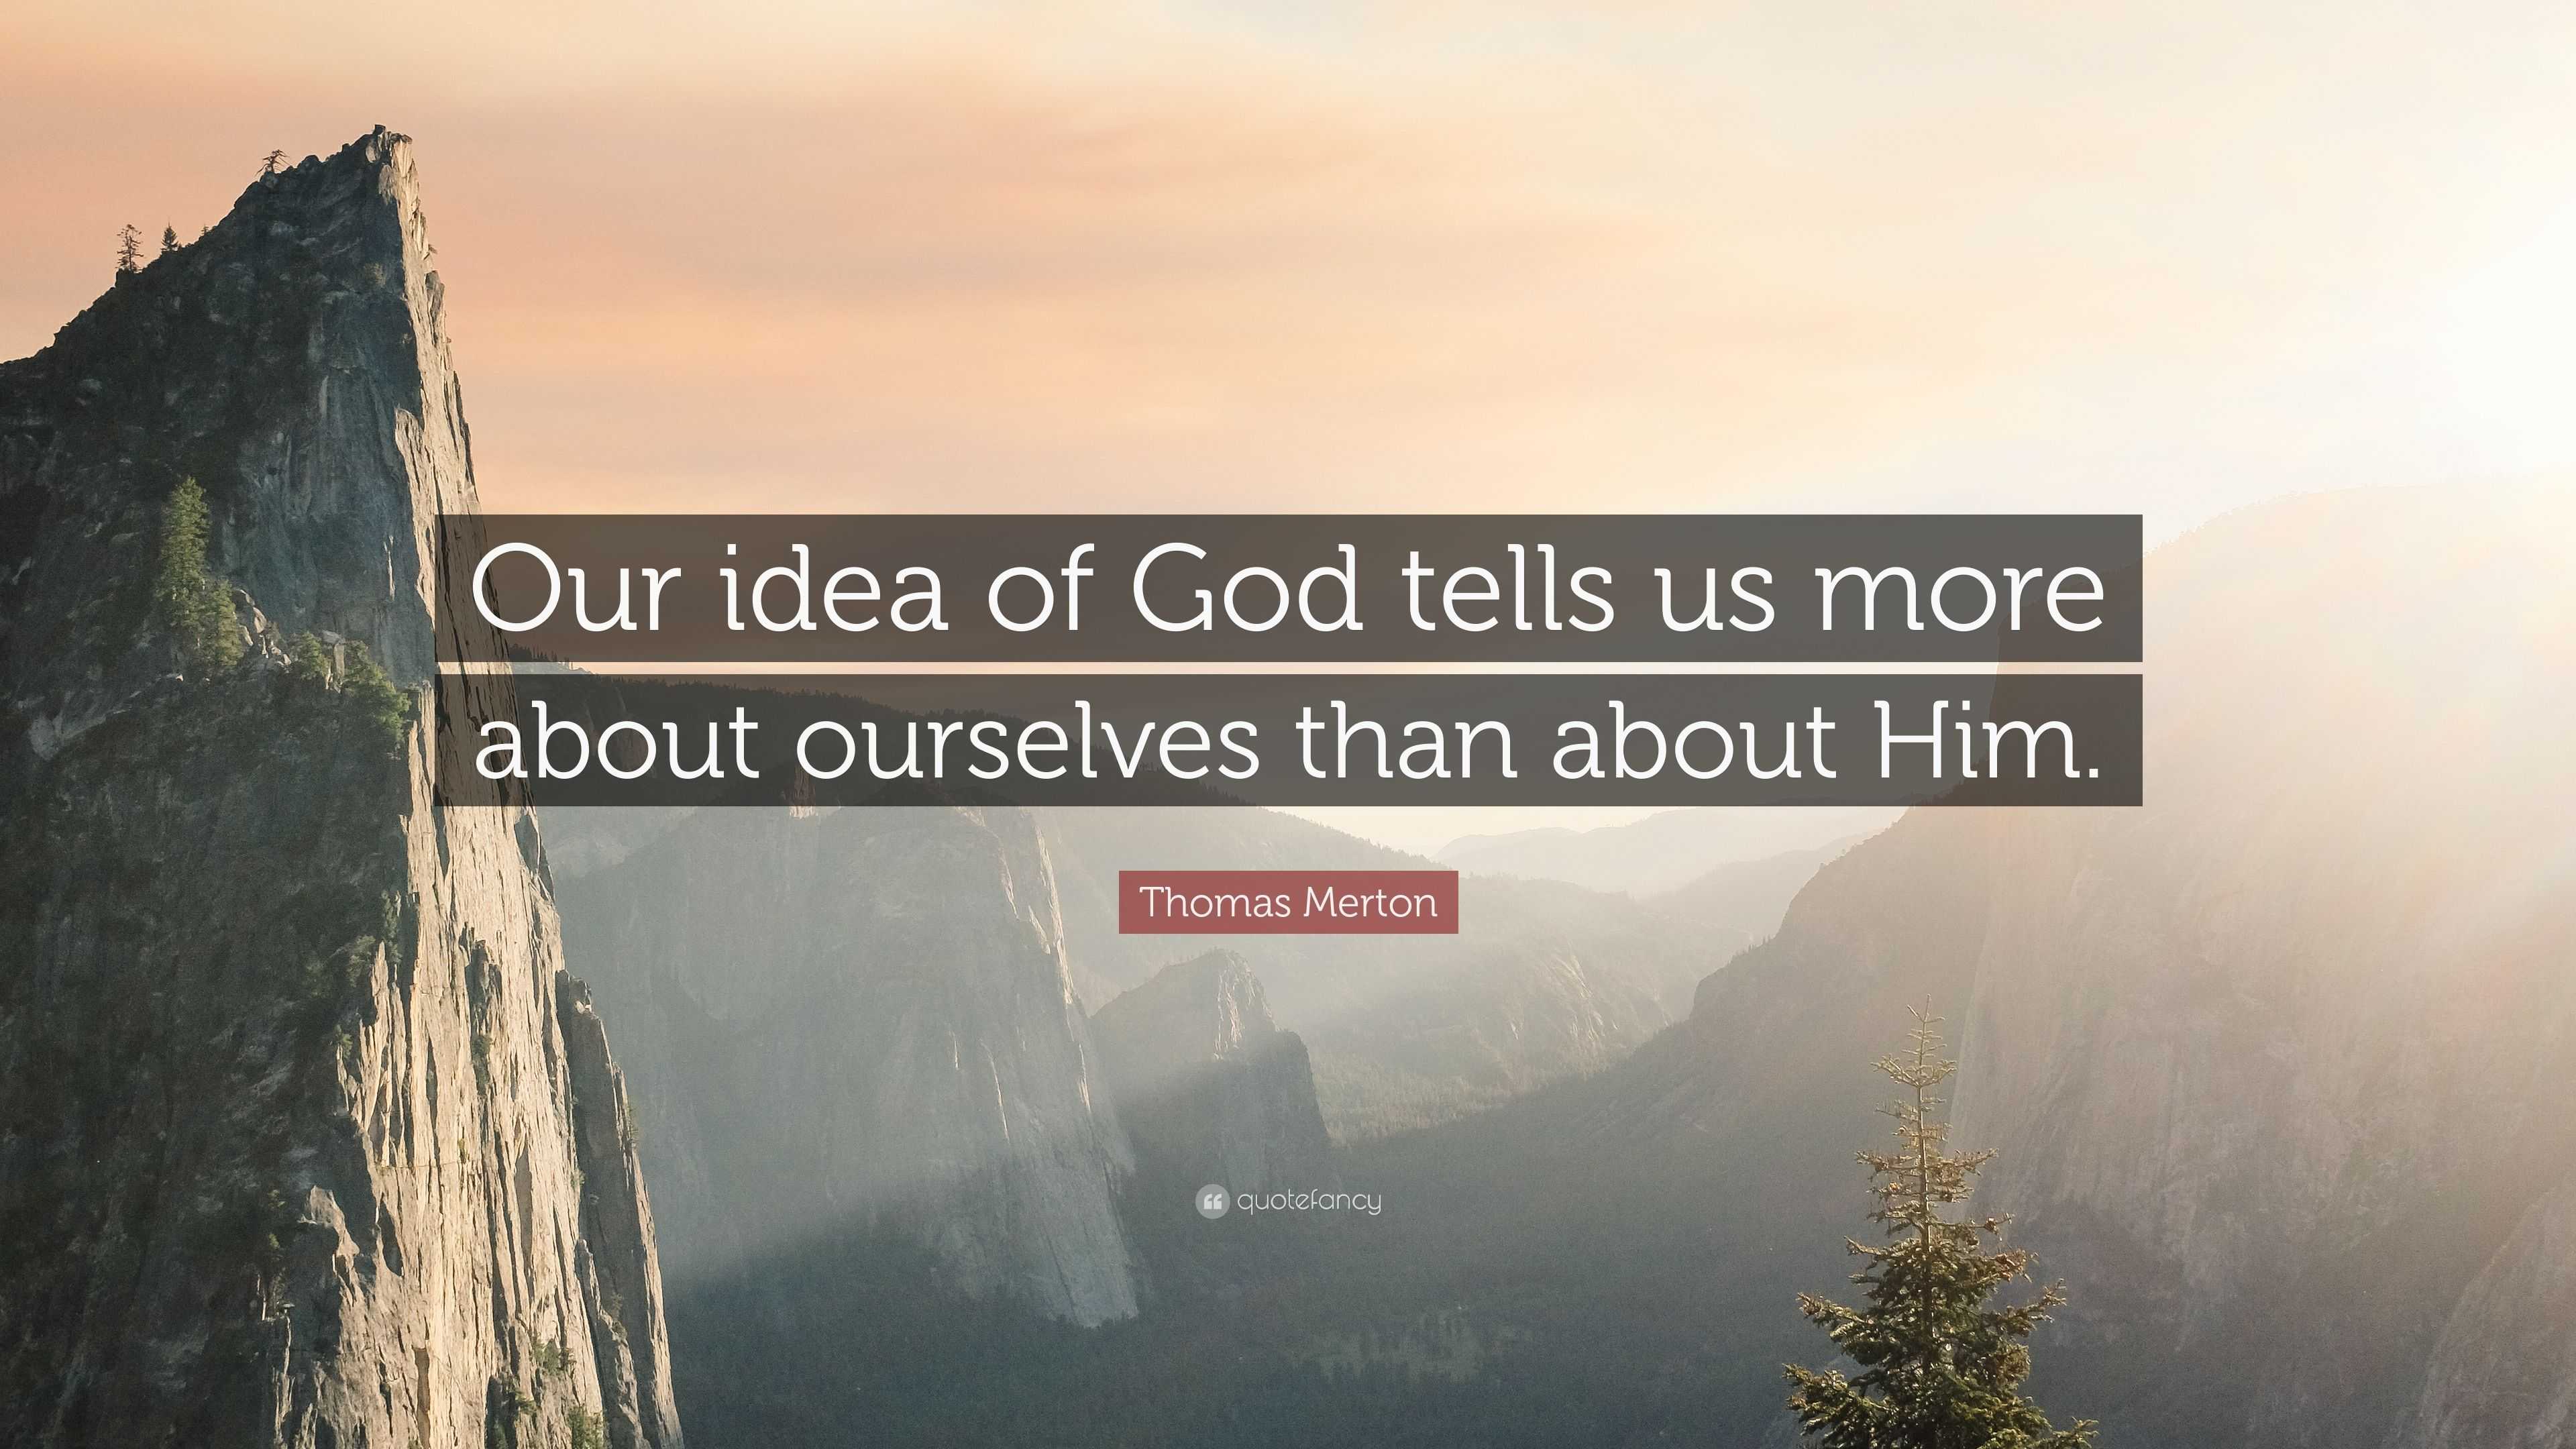 2252338-Thomas-Merton-Quote-Our-idea-of-God-tells-us-more-about-ourselves.jpg